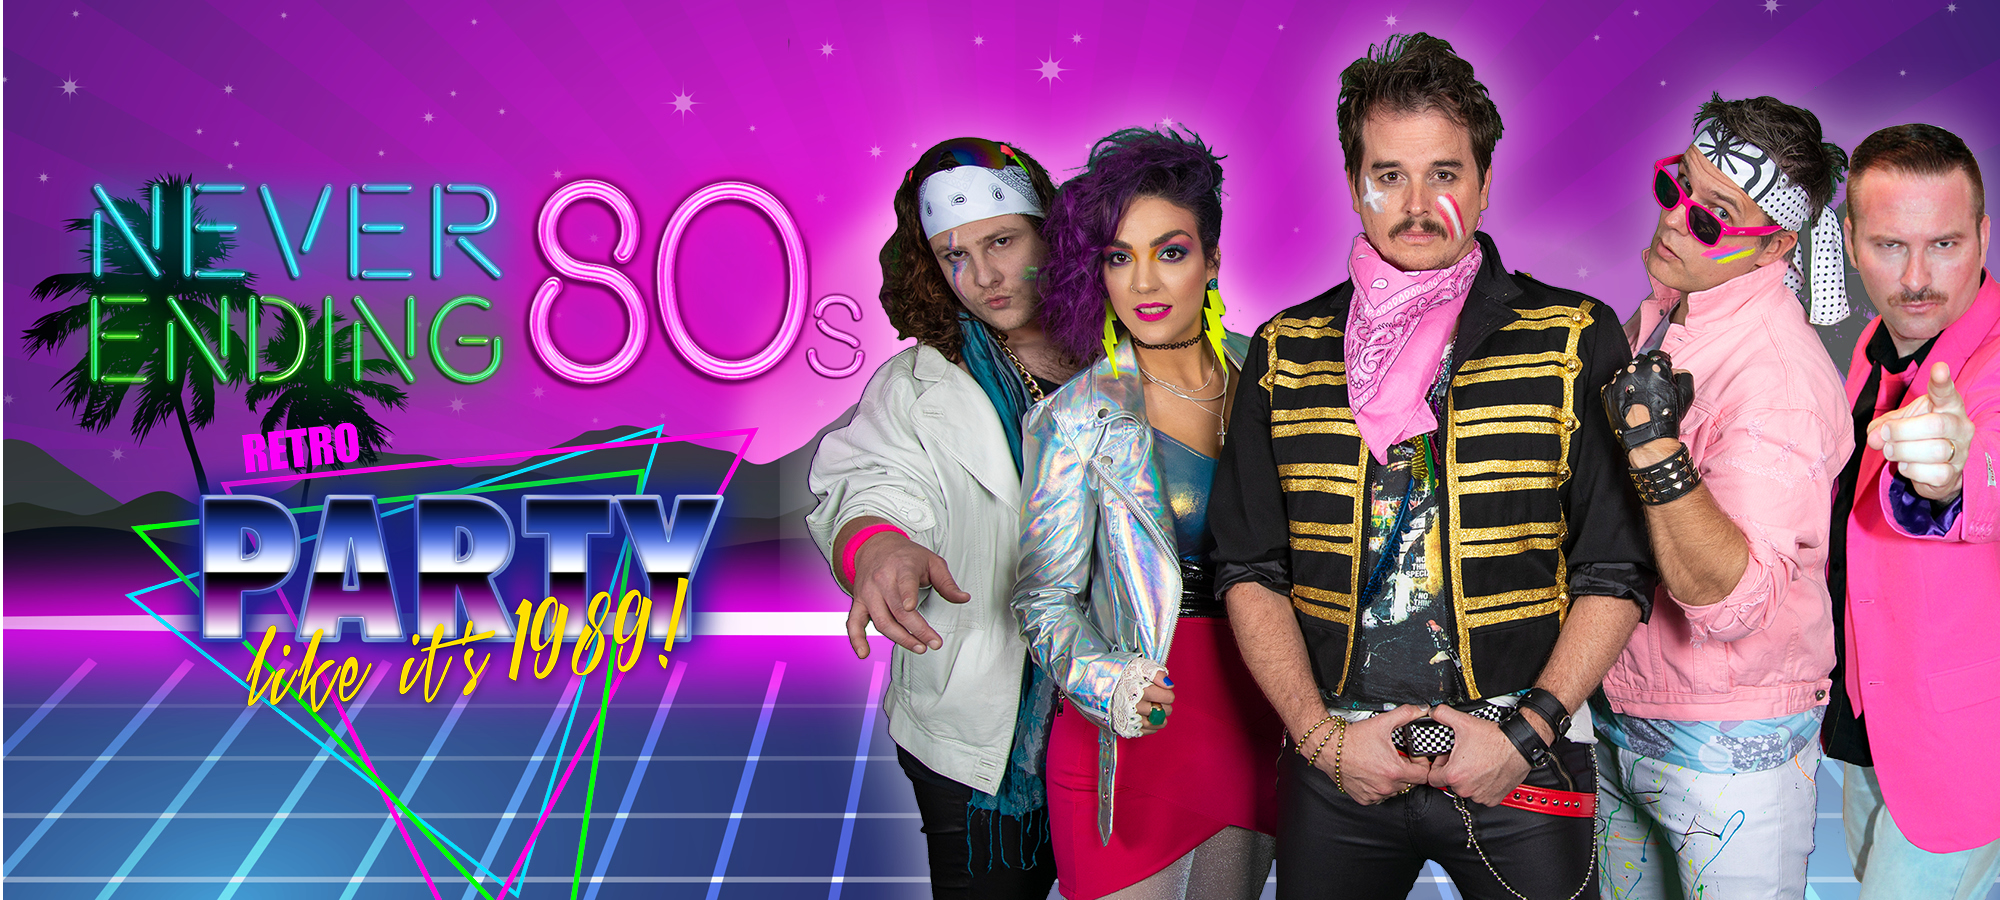 Never Ending 80s – Party Like It’s 1989